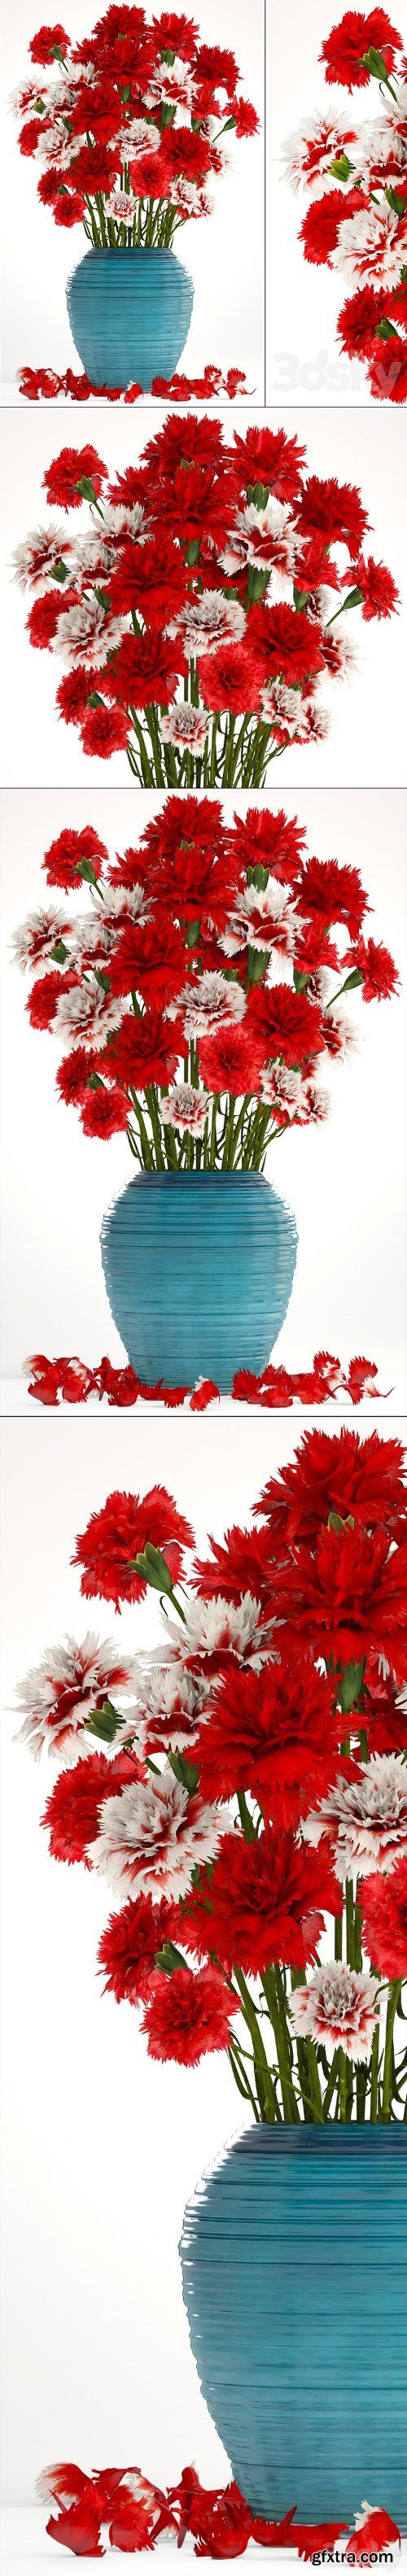 Bouquet of flowers 13. Carnation, vase, red flowers, decor